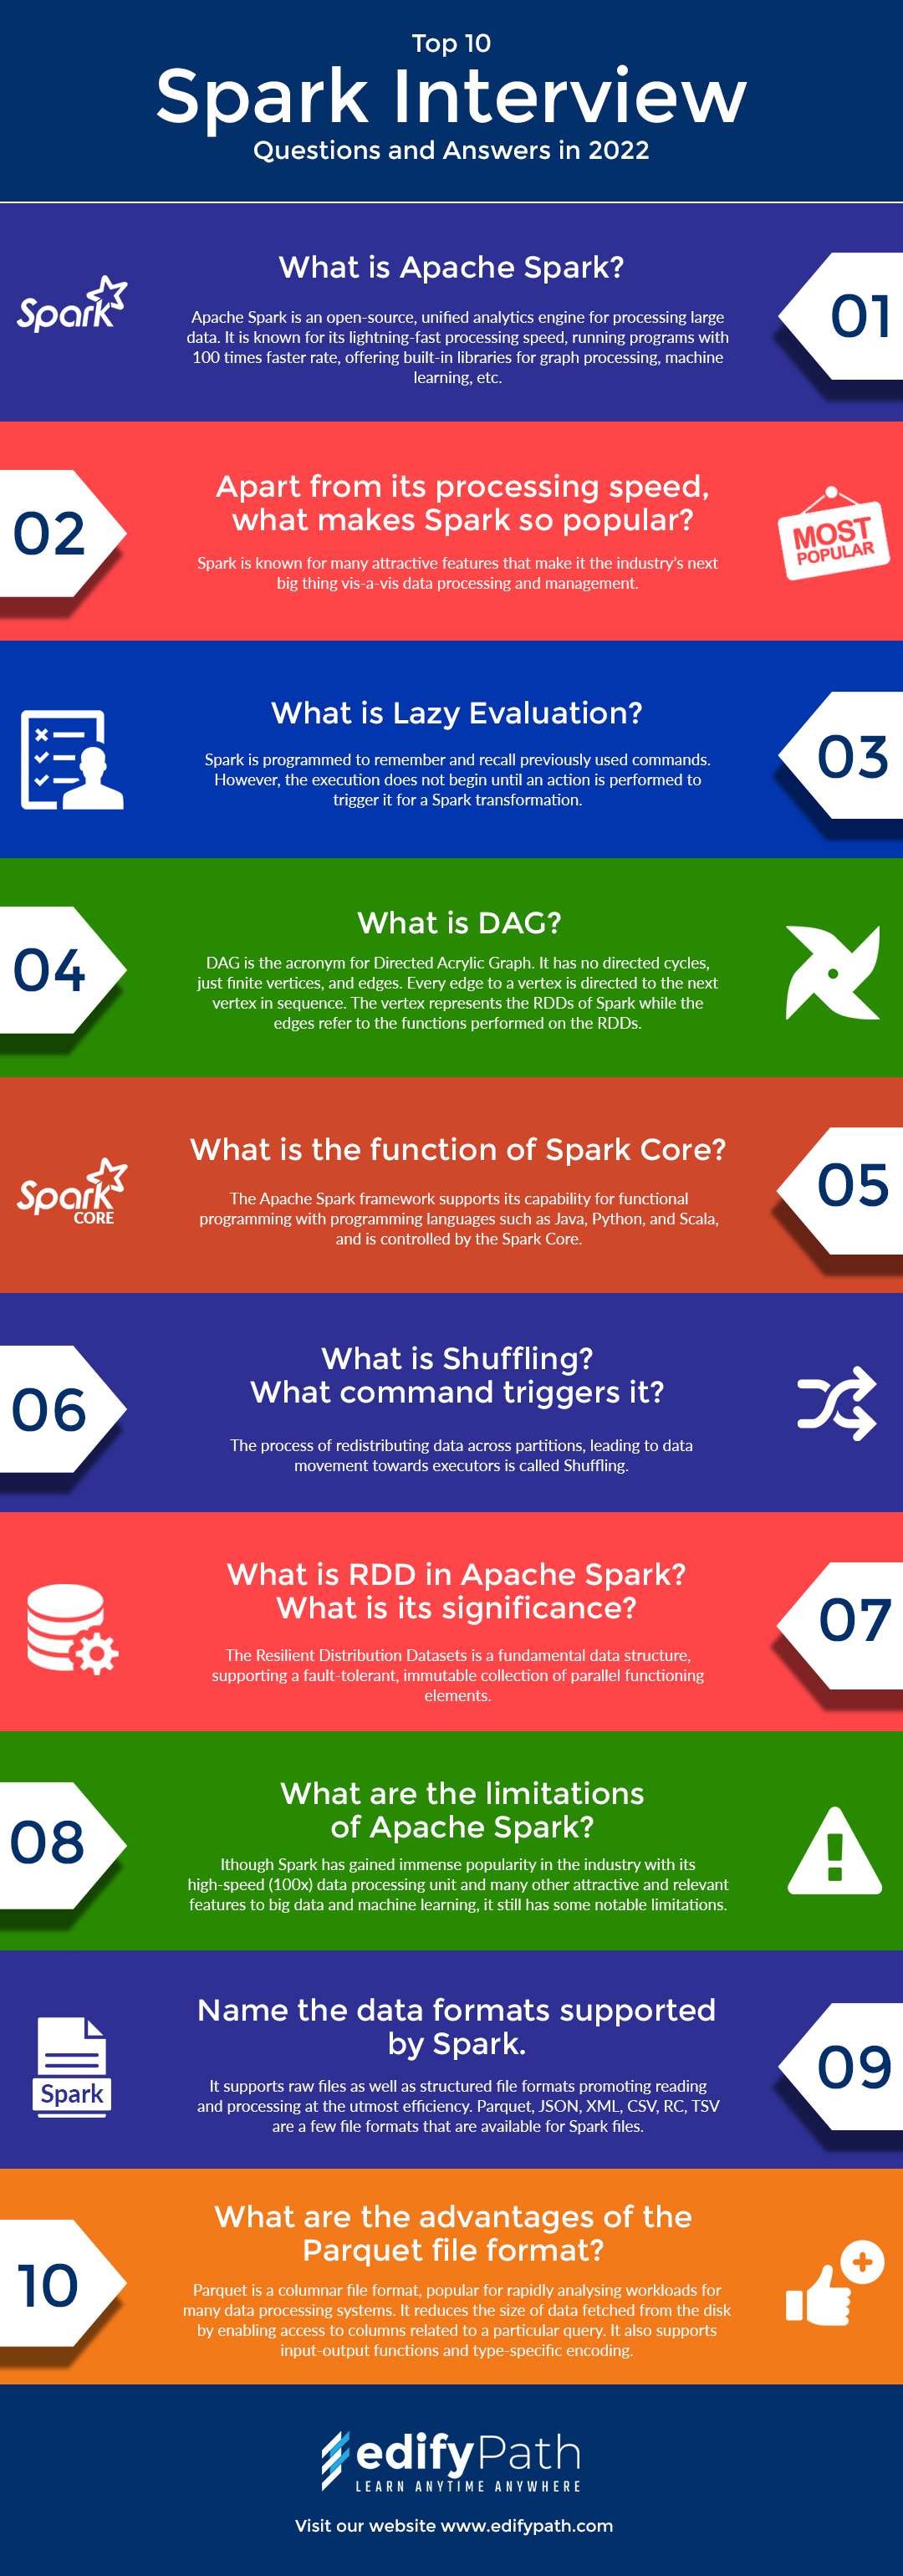 Top 10 Spark Interview Questions and Answers in 2022